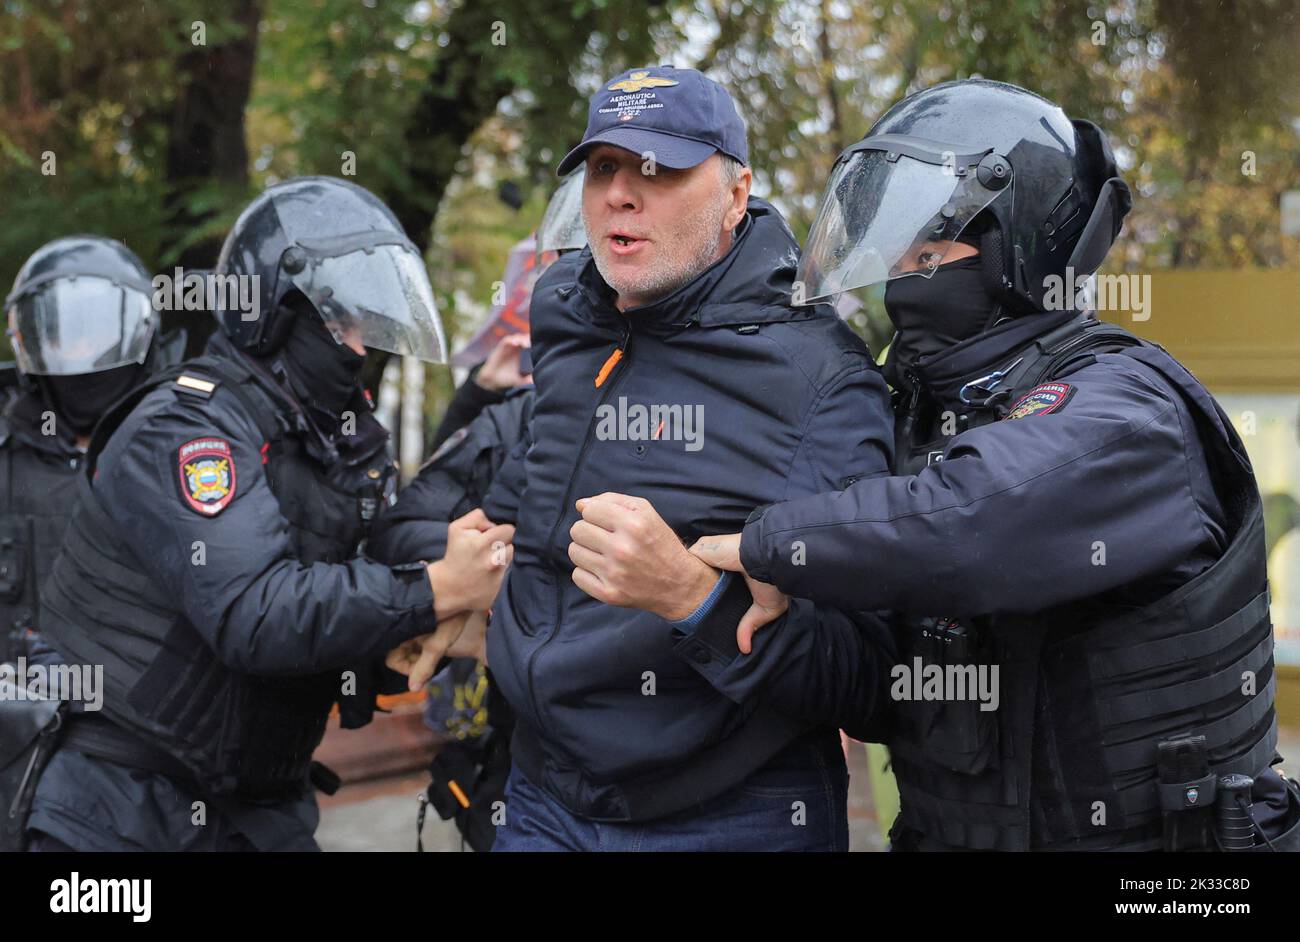 Russian law enforcement officers detain a person during a rally, after opposition activists called for street protests against the mobilisation of reservists ordered by President Vladimir Putin, in Moscow, Russia September 24, 2022. REUTERS/REUTERS PHOTOGRAPHER Stock Photo